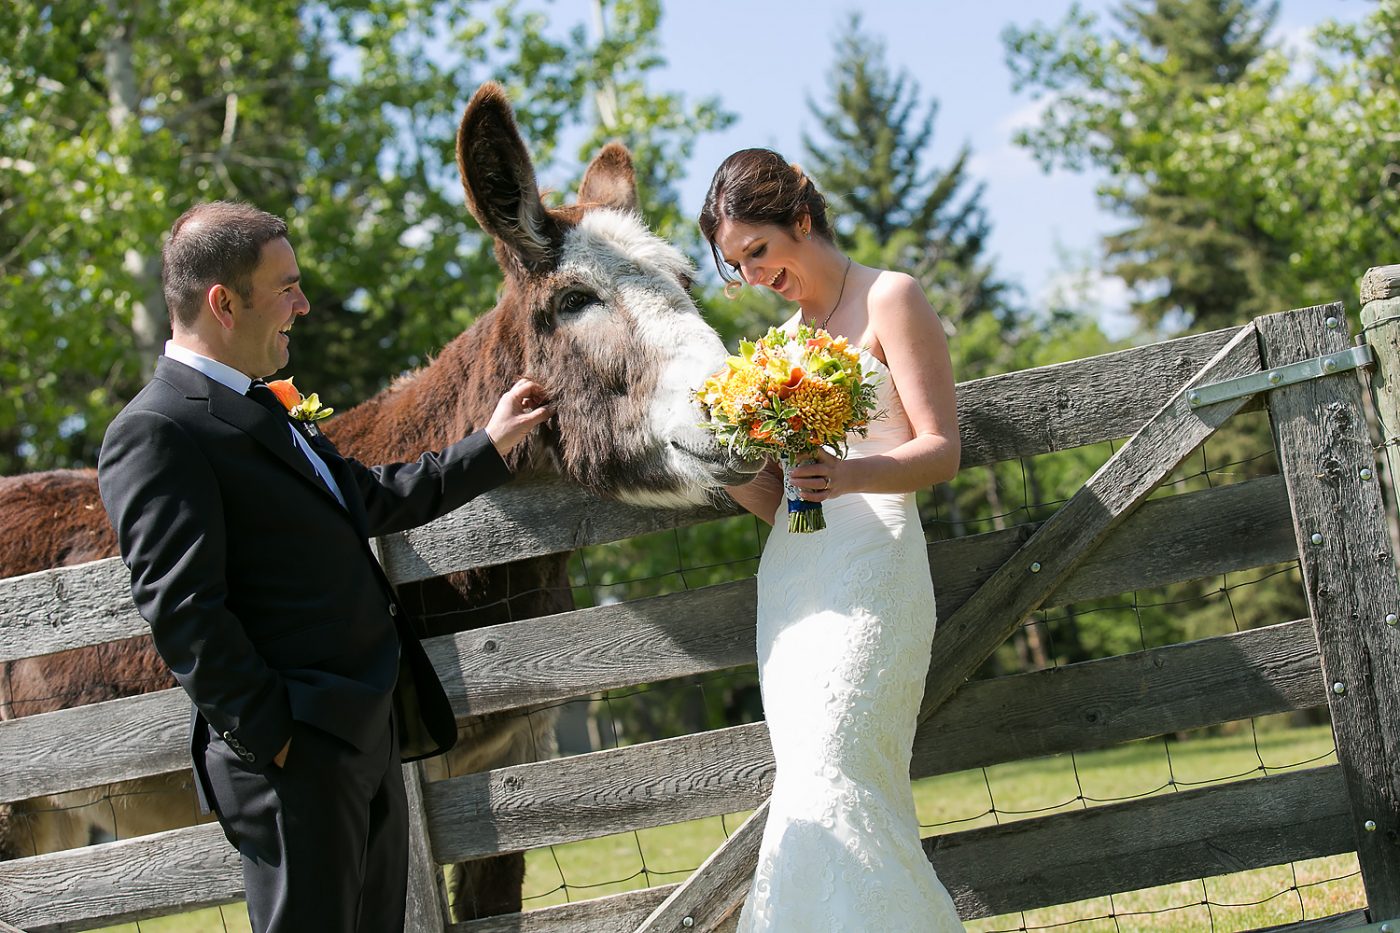 Joelle and Ketih standing with a donkey on their wedding day